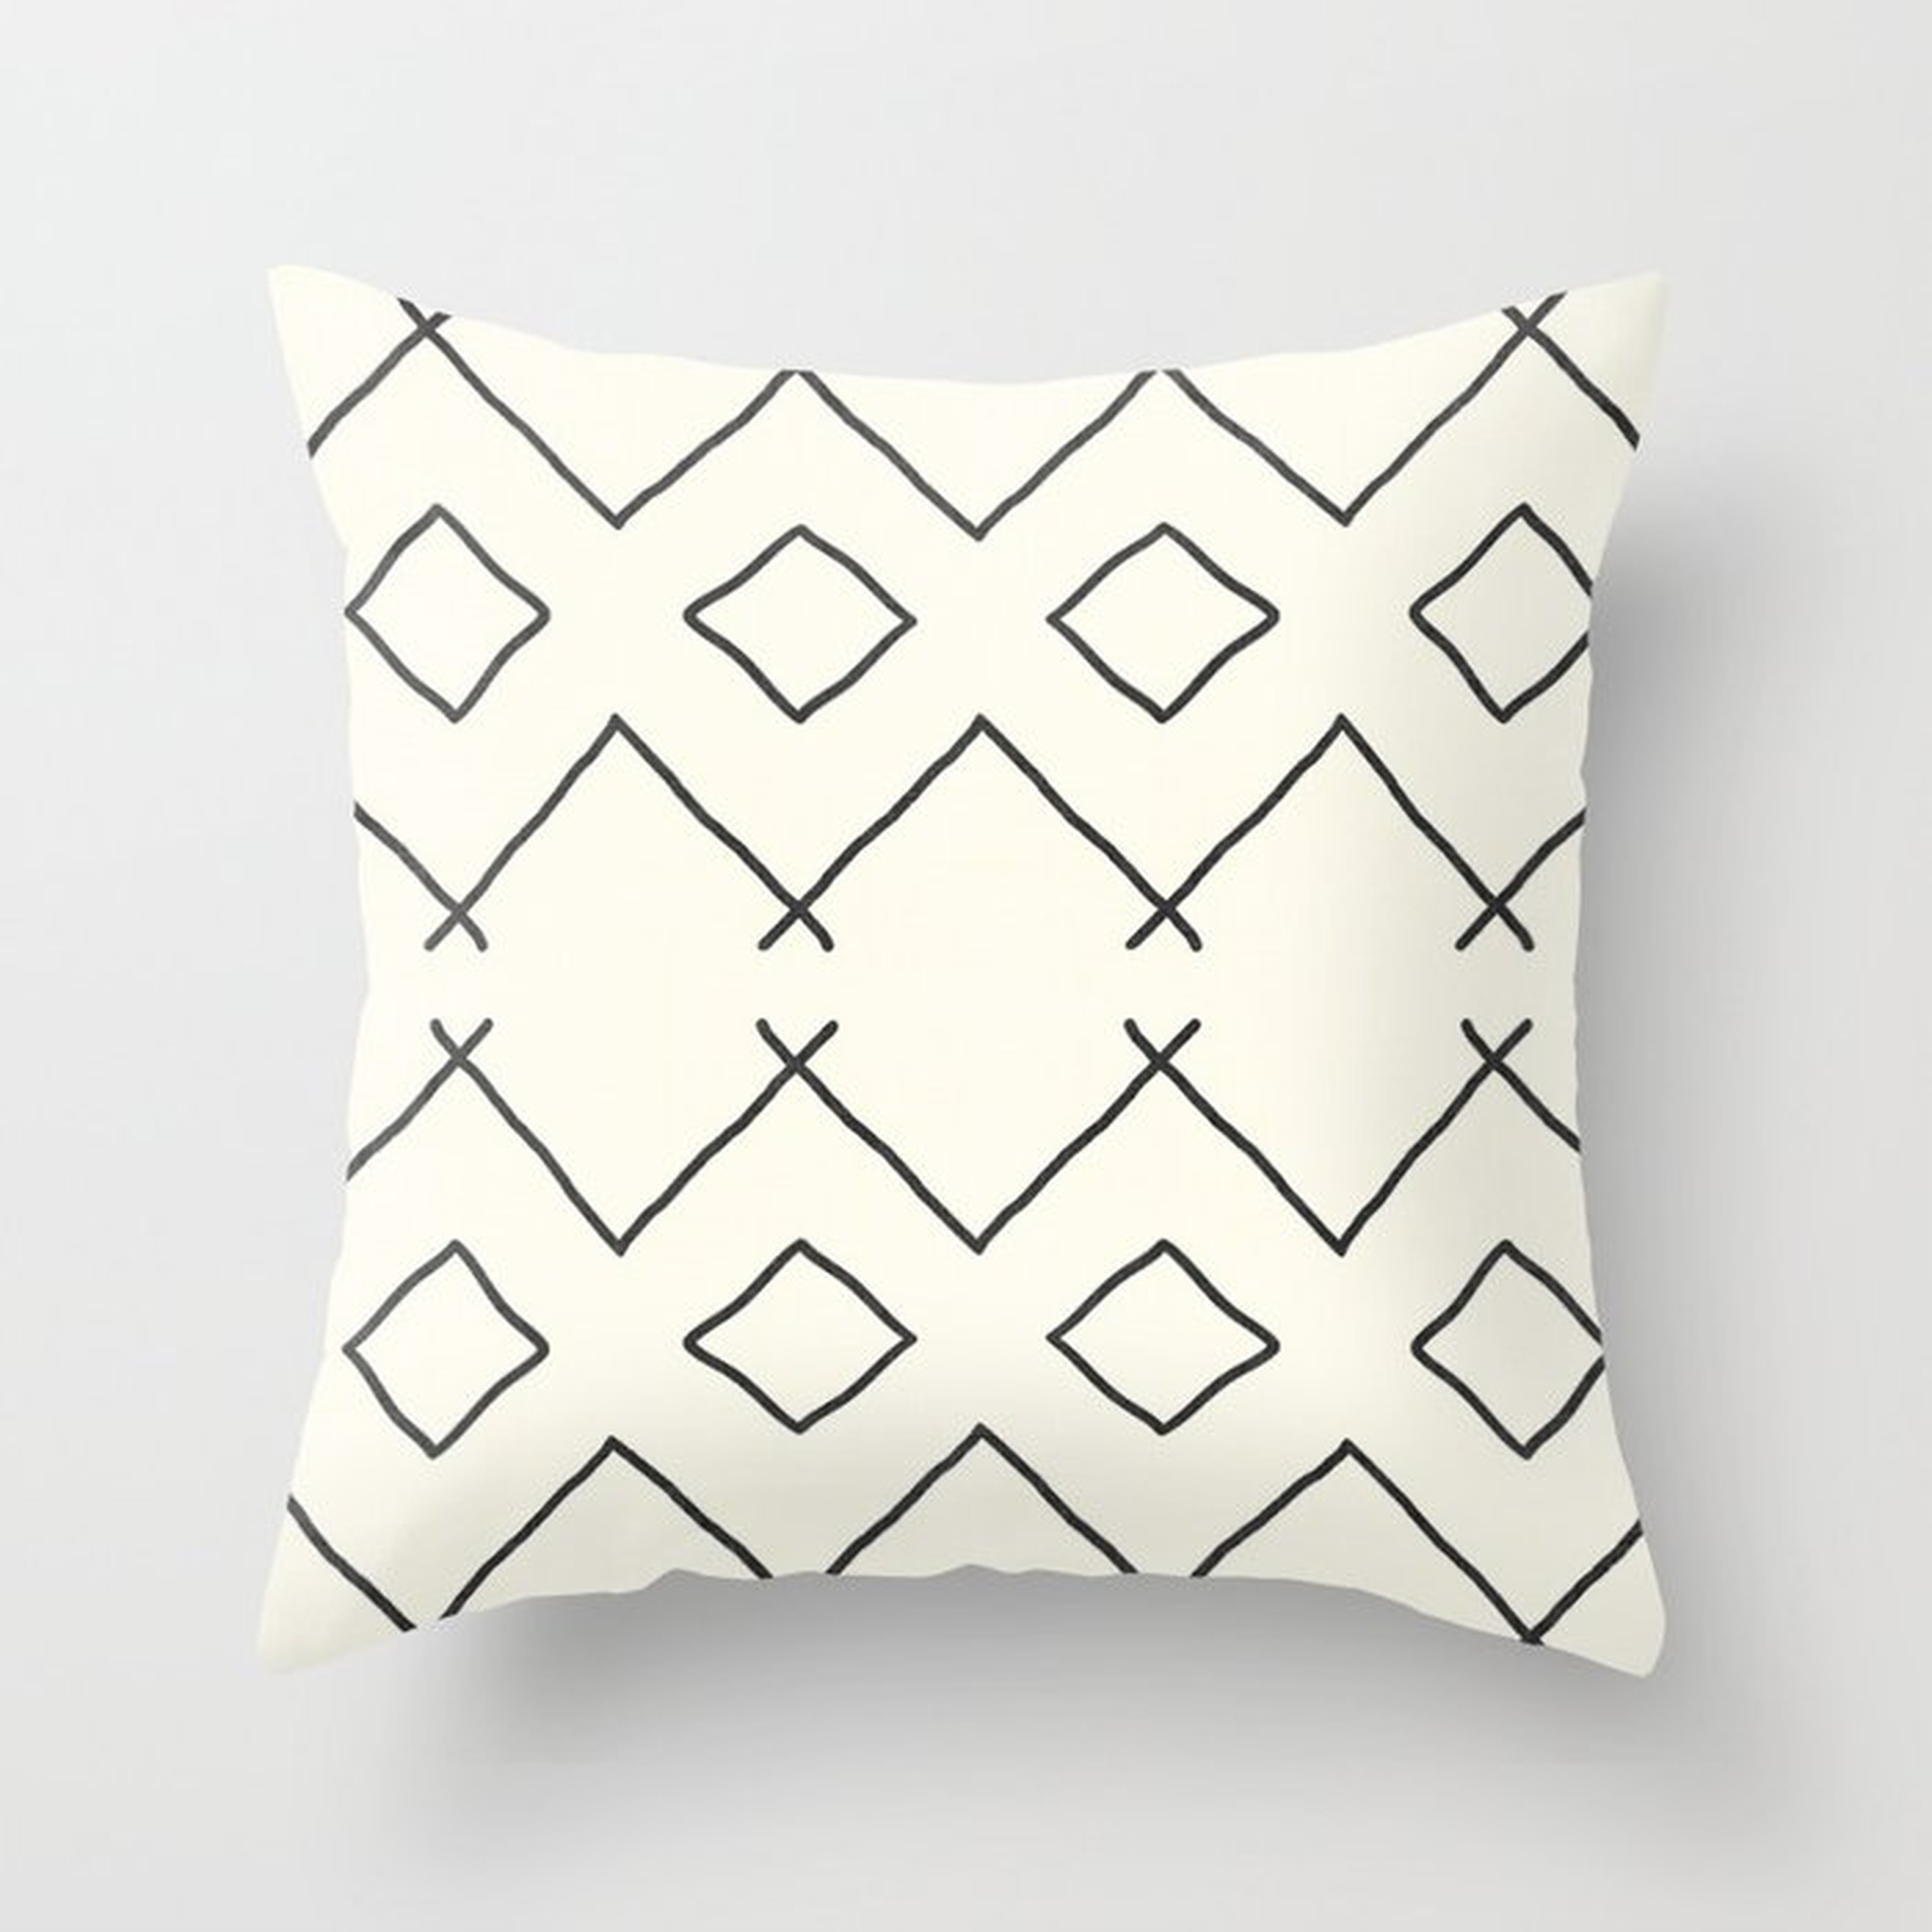 Bath In Cream Throw Pillow by House Of Haha - Cover (16" x 16") With Pillow Insert - Indoor Pillow - Society6